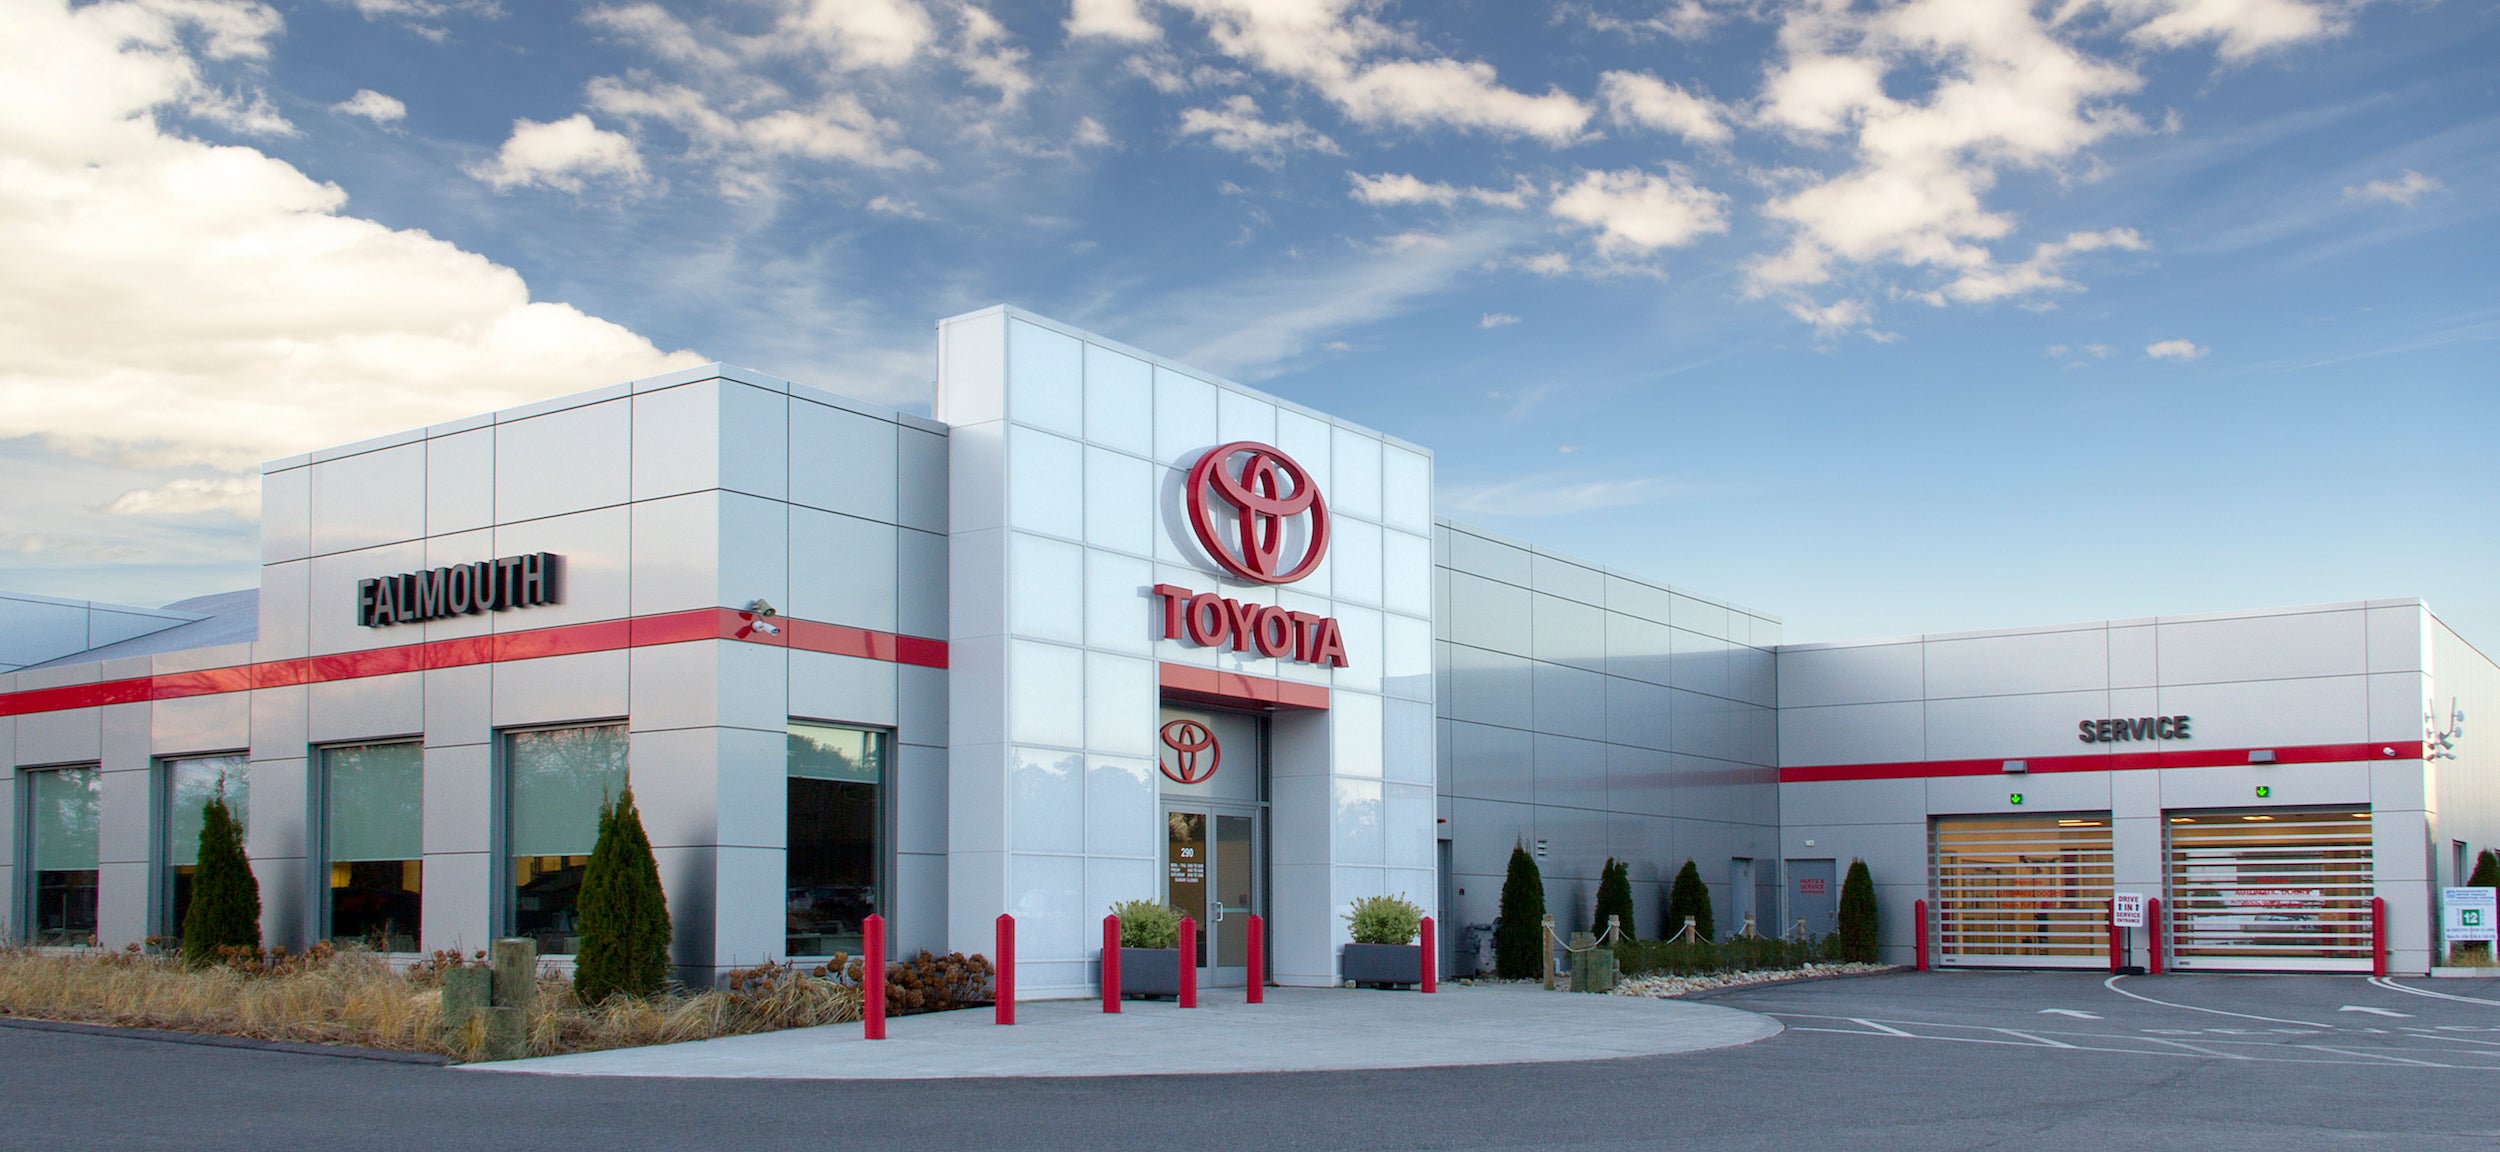 About Falmouth Toyota of Bourne, MA - Cape Cod Toyota Dealership